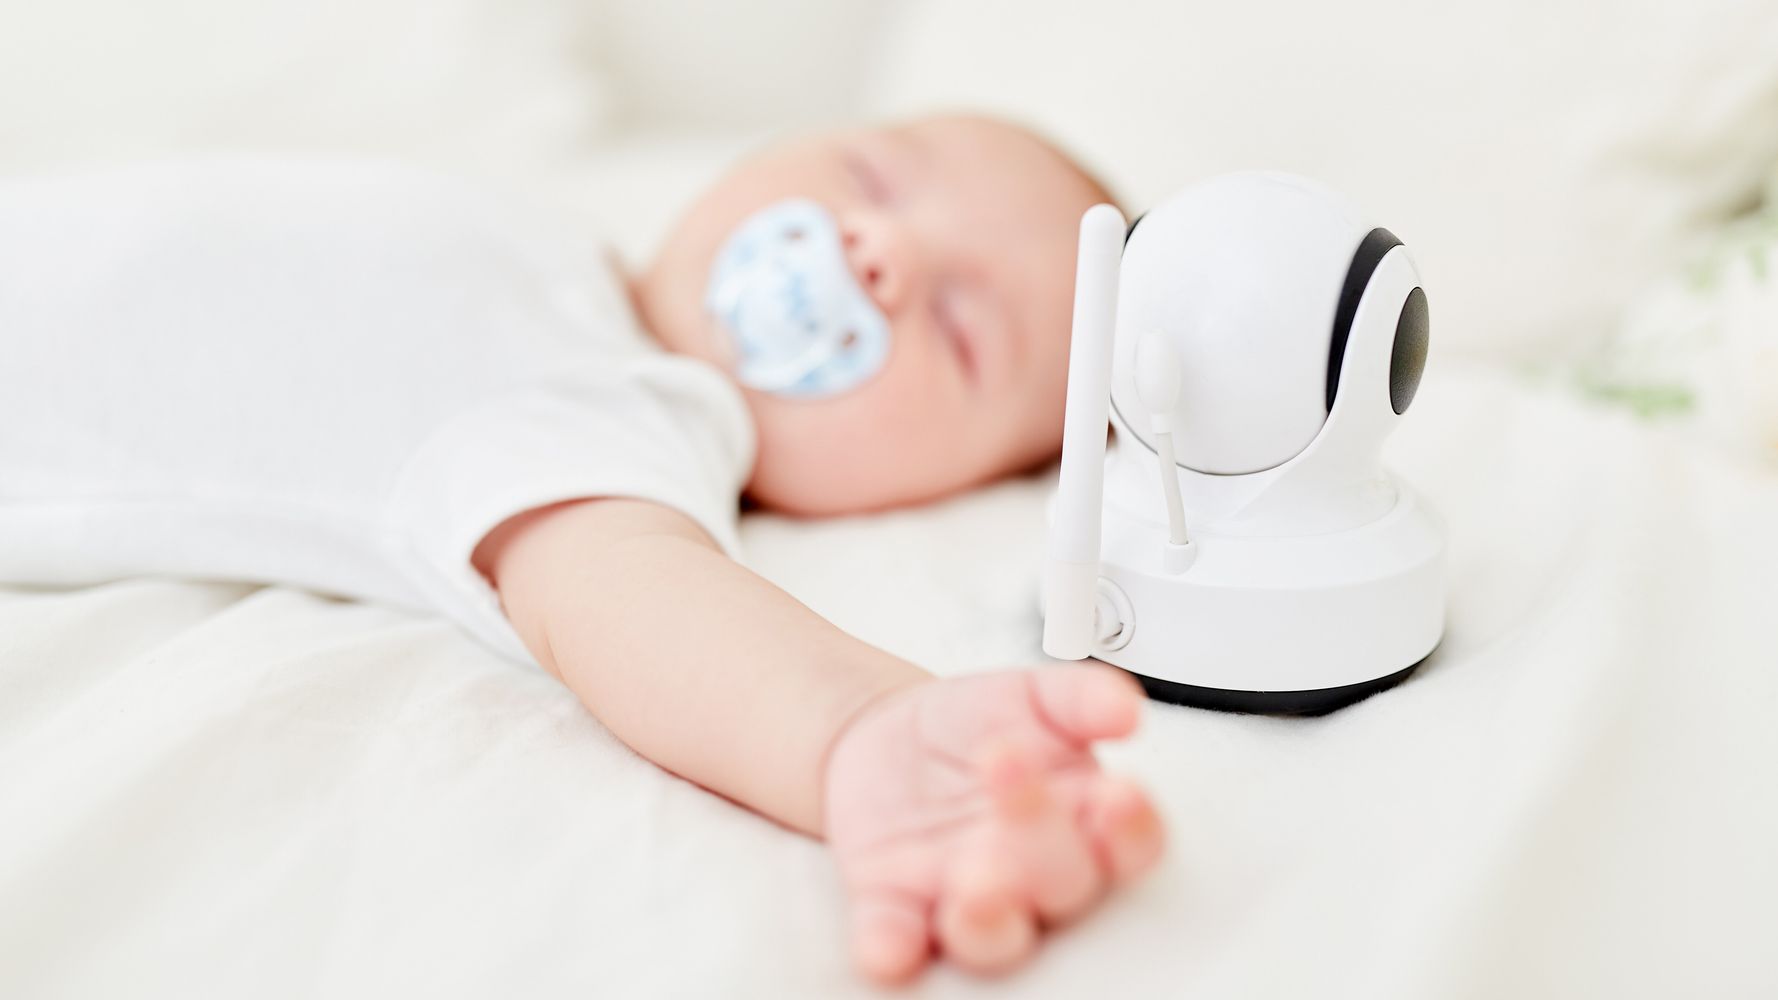 When Should Parents Stop Using A Baby Monitor?